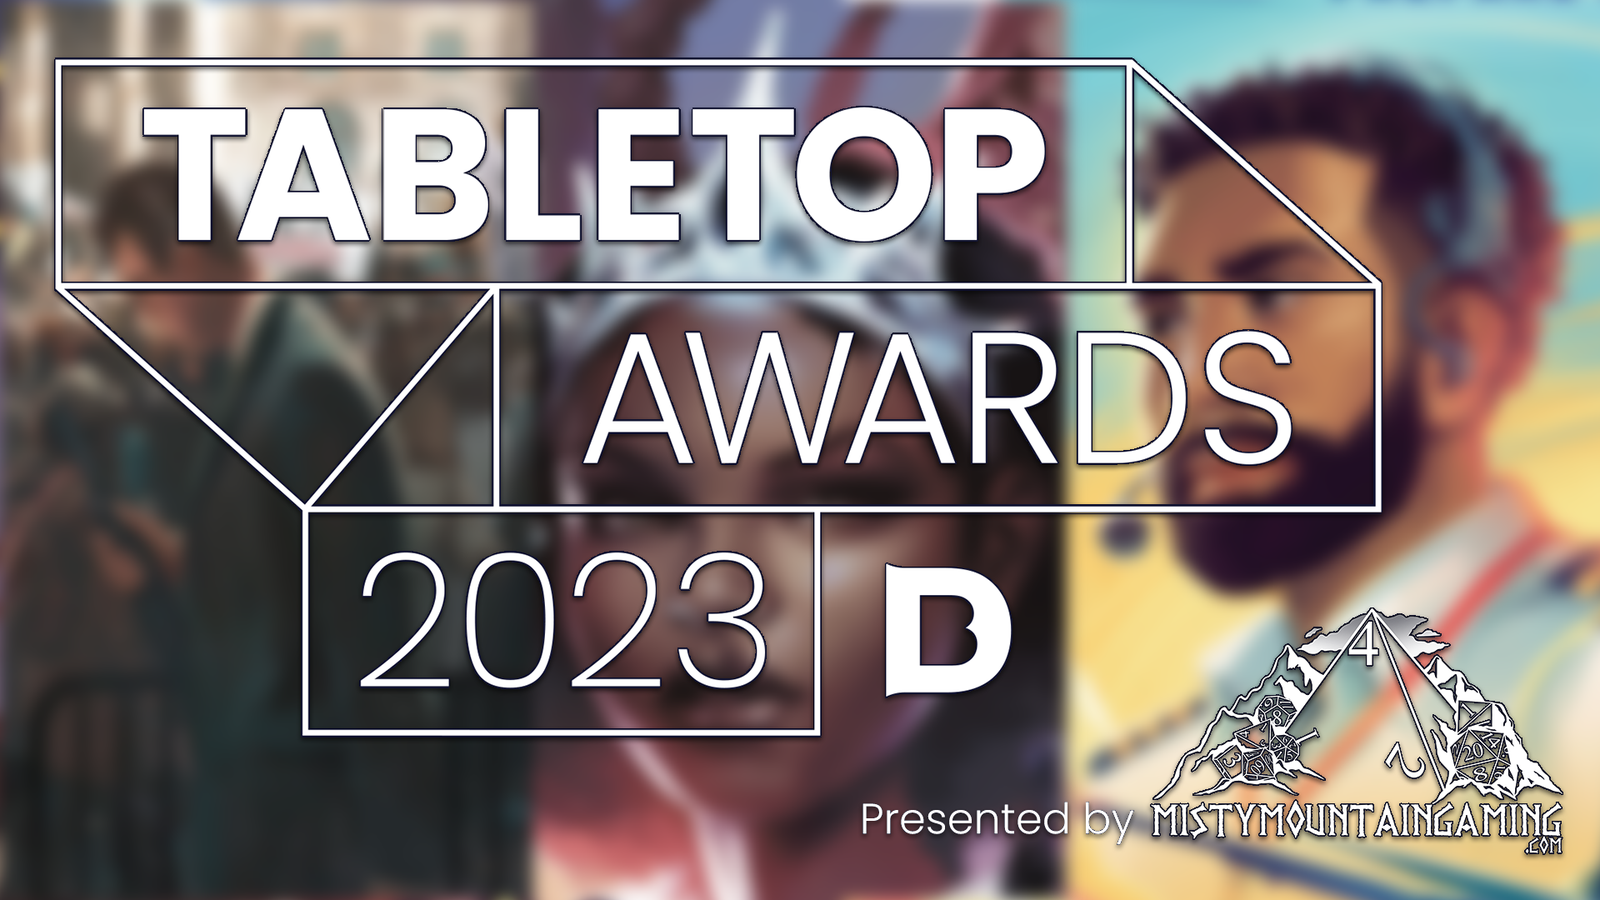 TABLETOP GAMING AWARDS 2022 FINALISTS ANNOUNCED - Tabletop Gaming